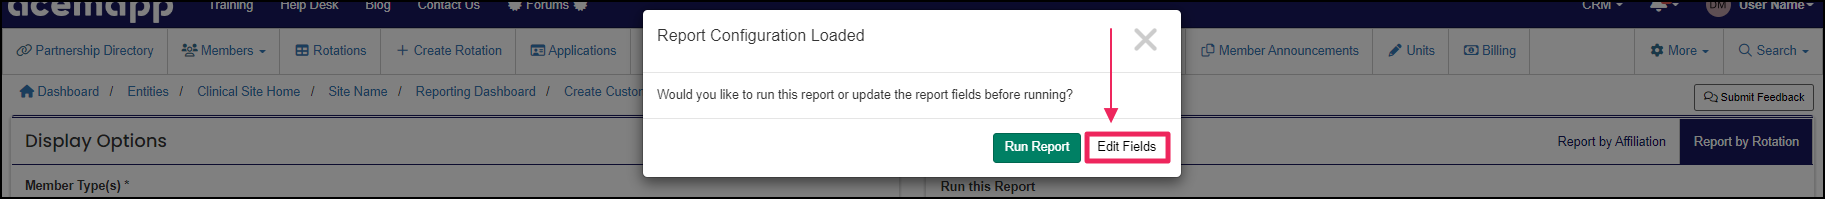 image shows edit field button from pop-up on saved report